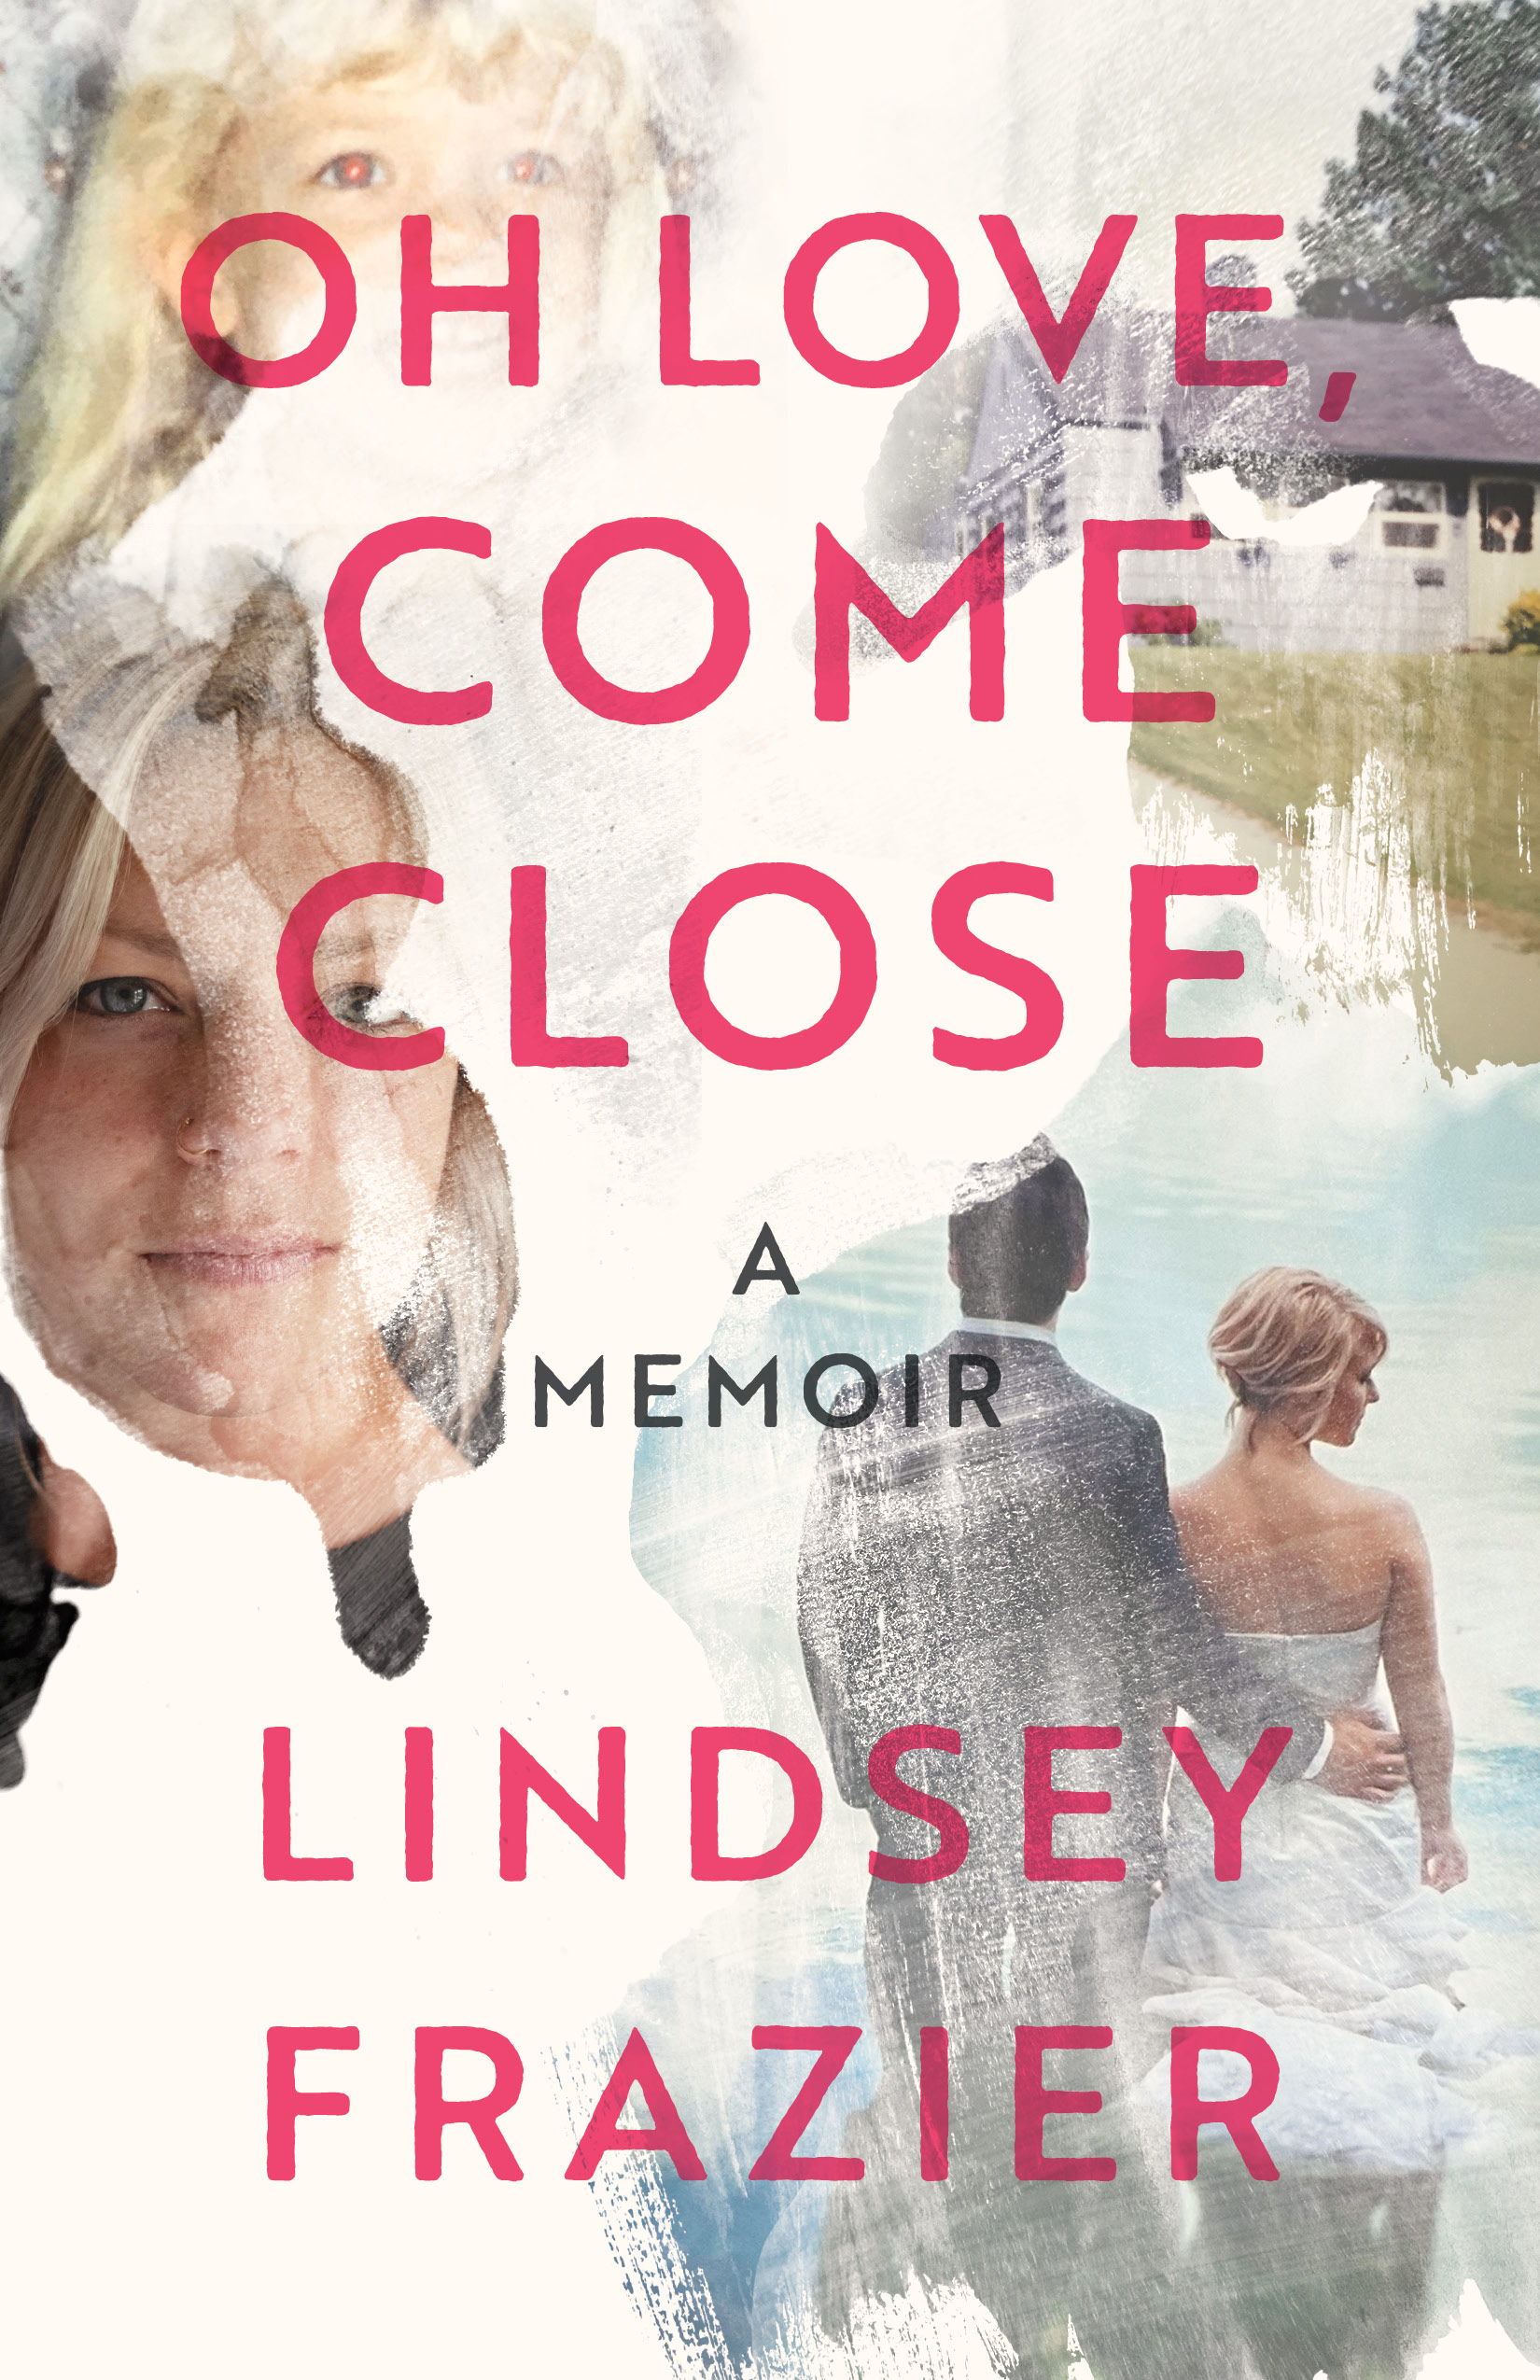 Oh Love, Come Close book cover shows a collage of personal photographs from the author partially obscured by smoke